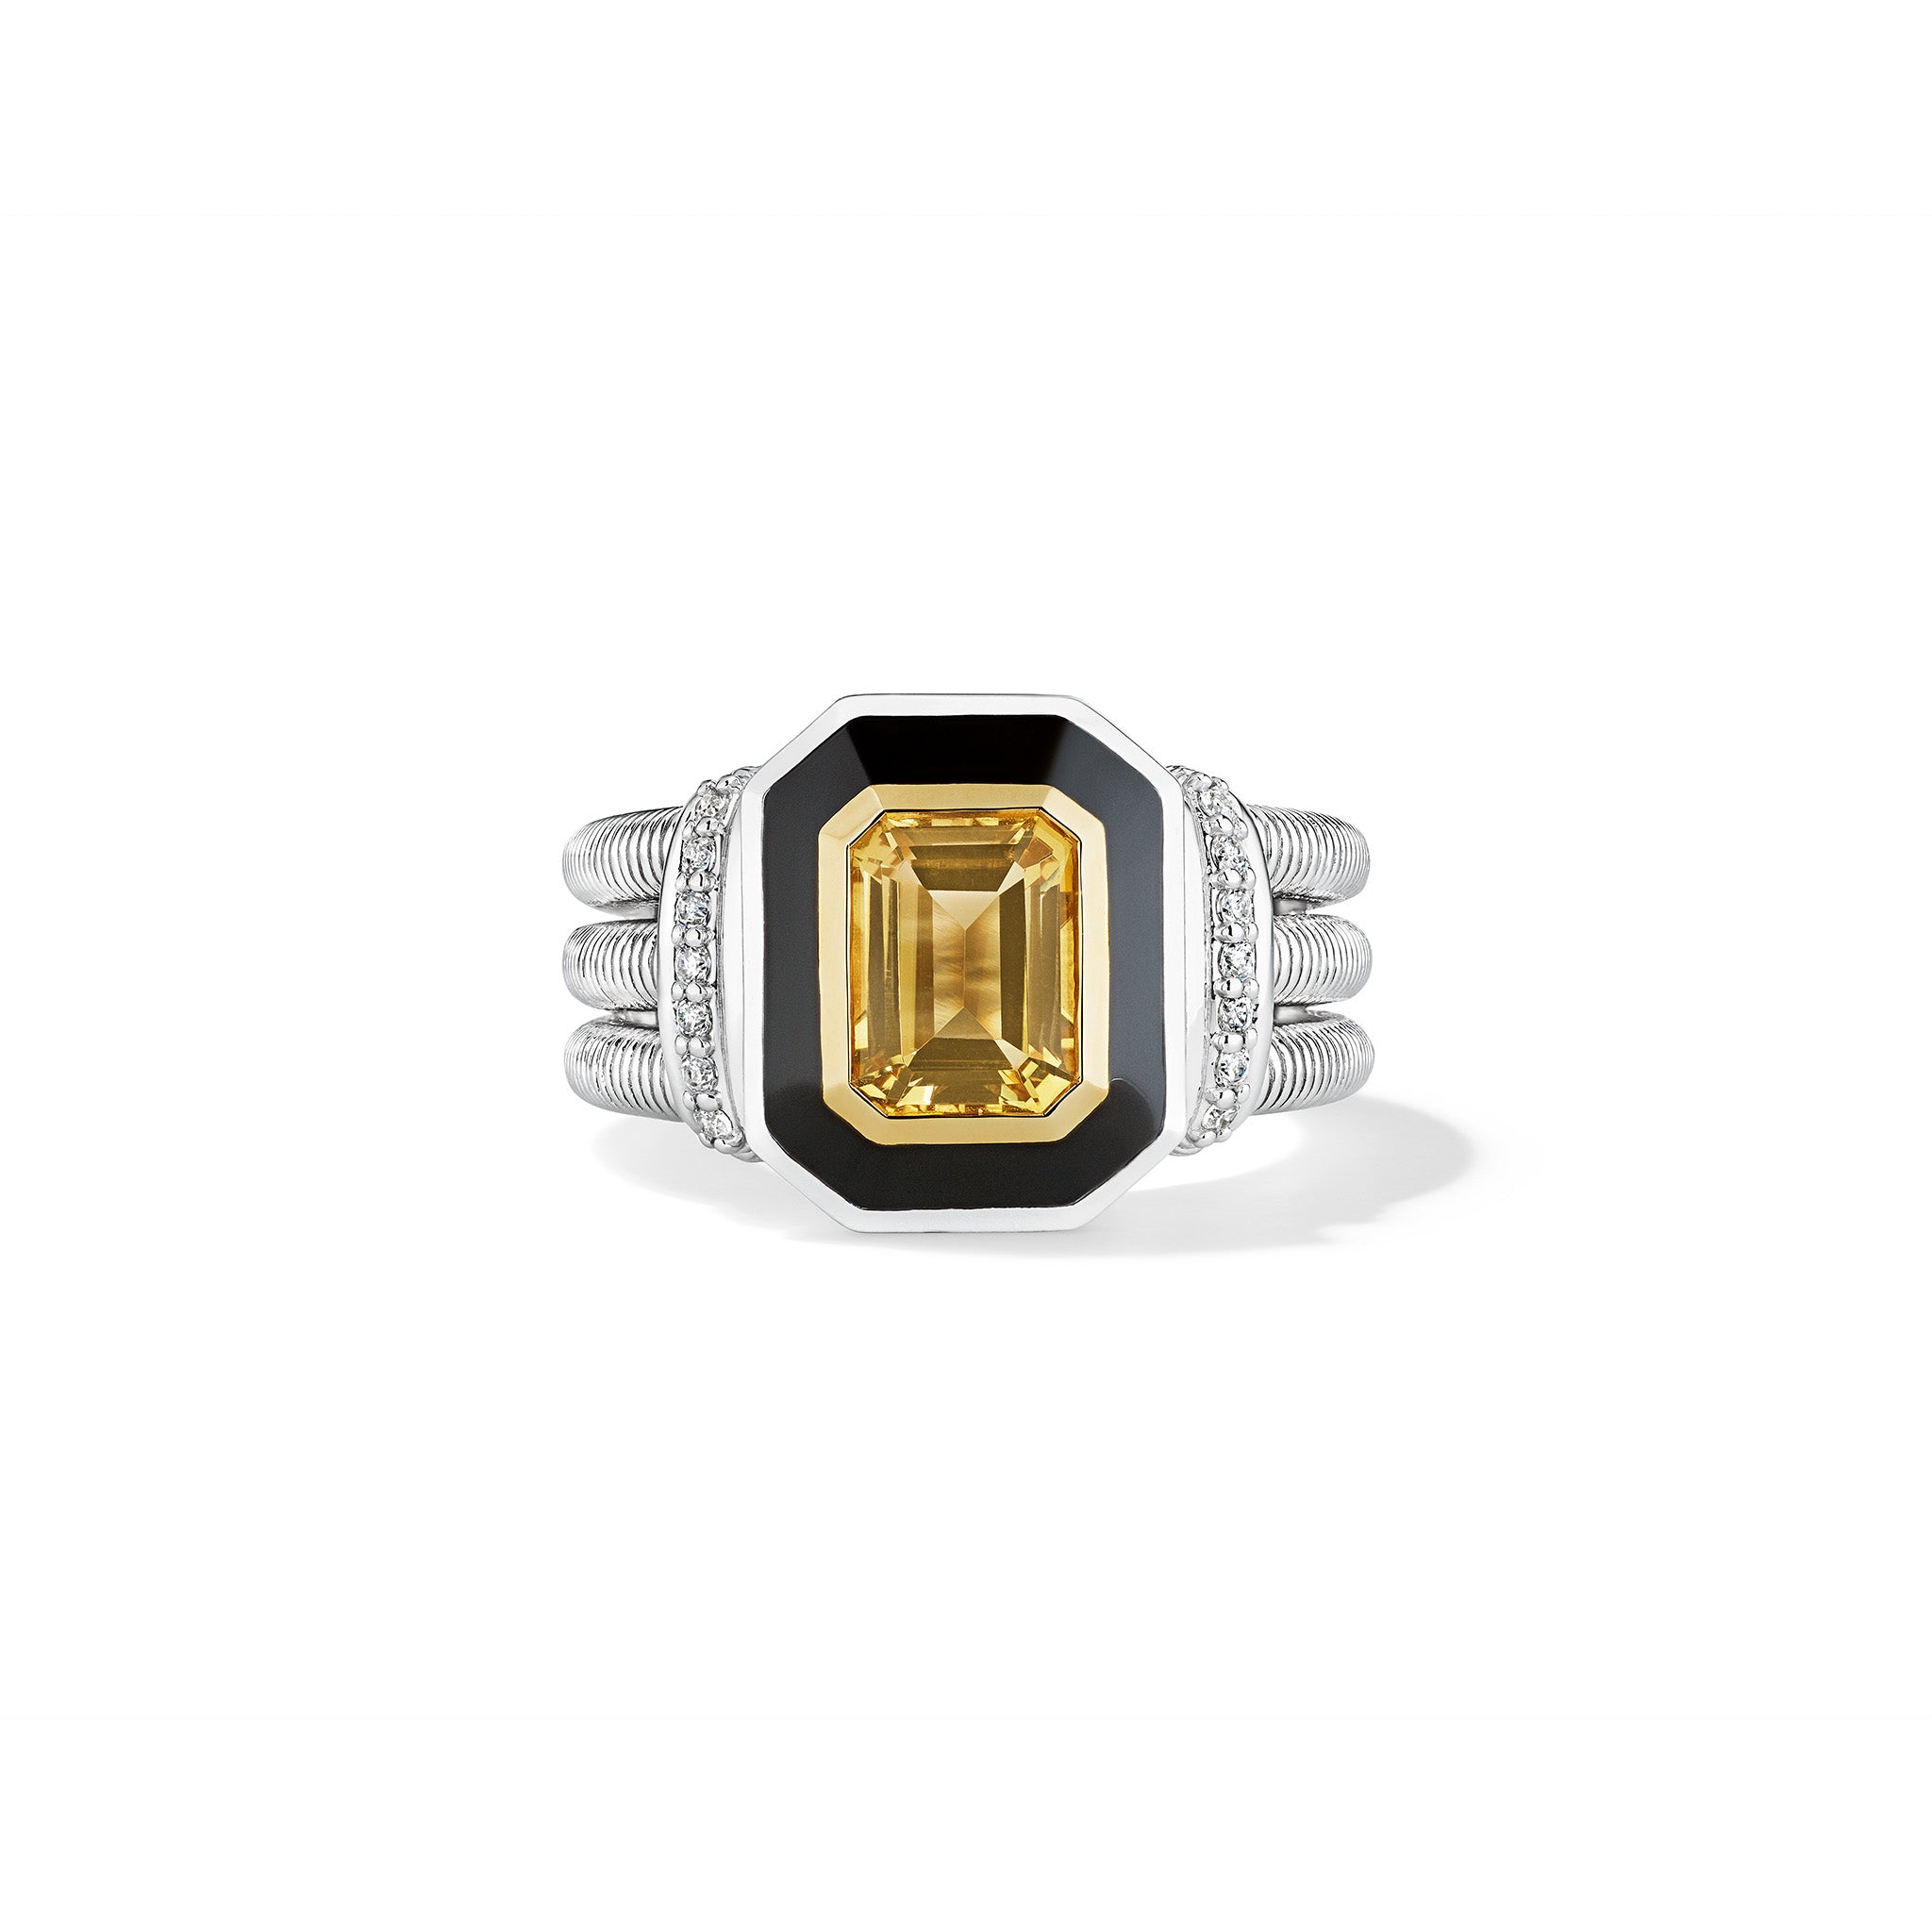 Adrienne Ring With Enamel, Champagne Citrine, Diamonds And 18K Gold